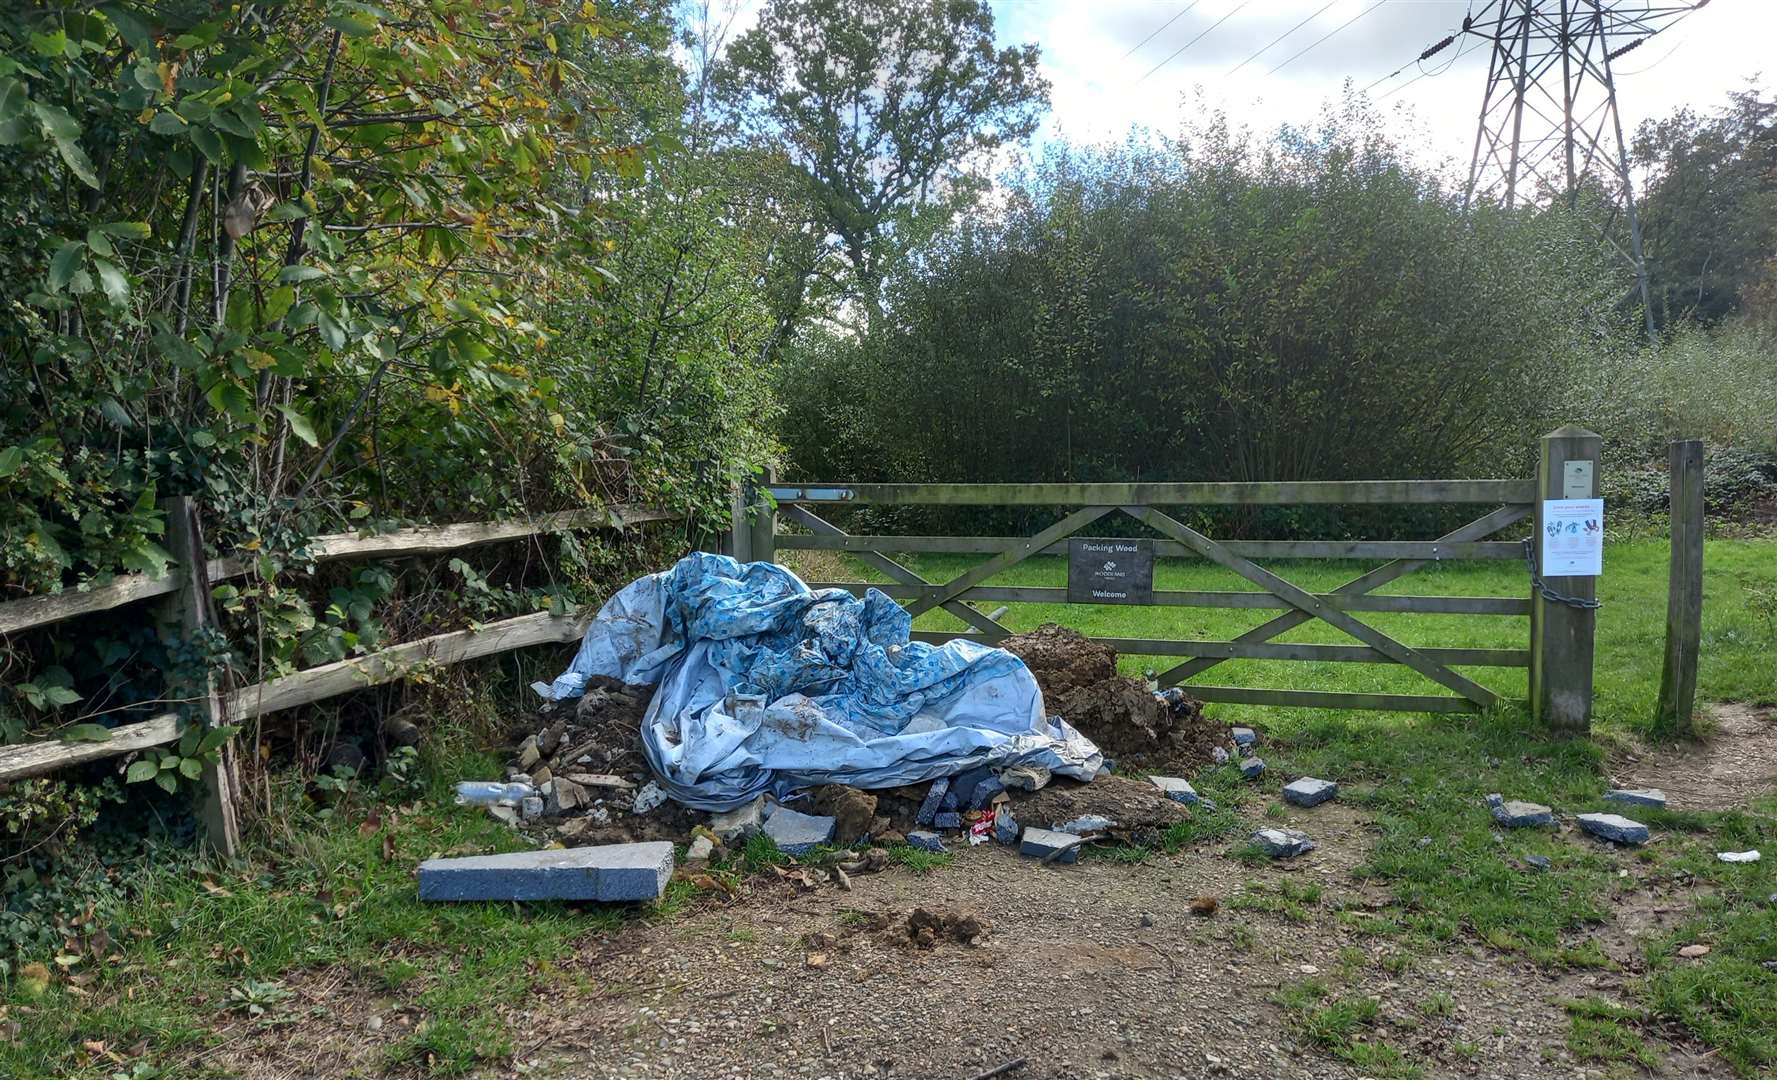 The fly-tipping in Capel Road. Photo: Ashford council